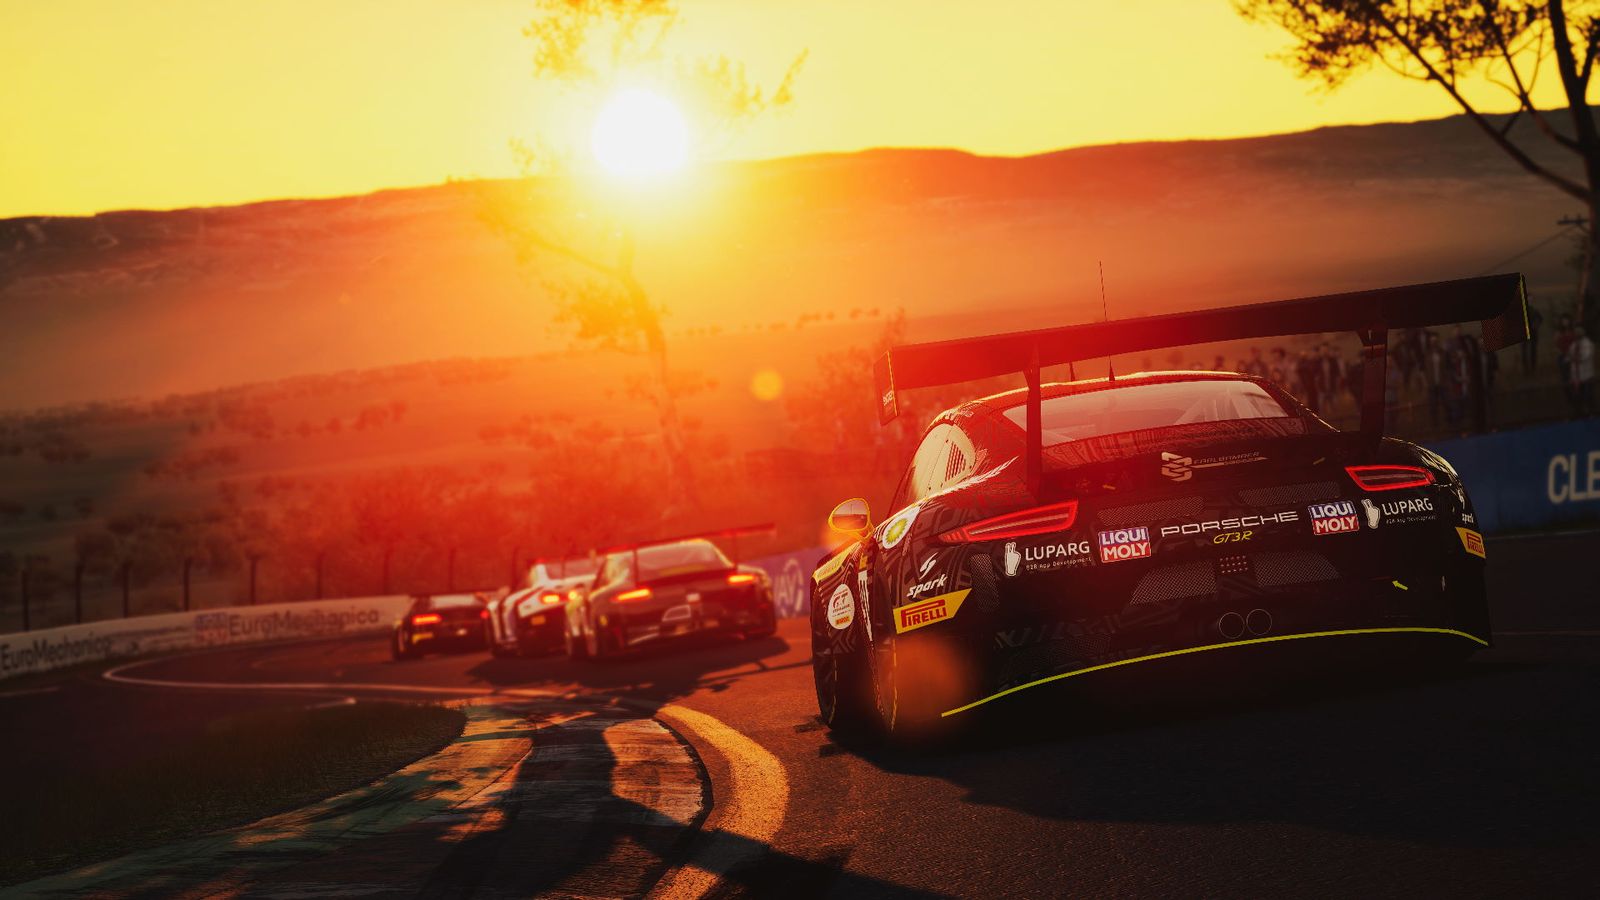 Why Assetto Corsa? Variety and Stunning visuals.